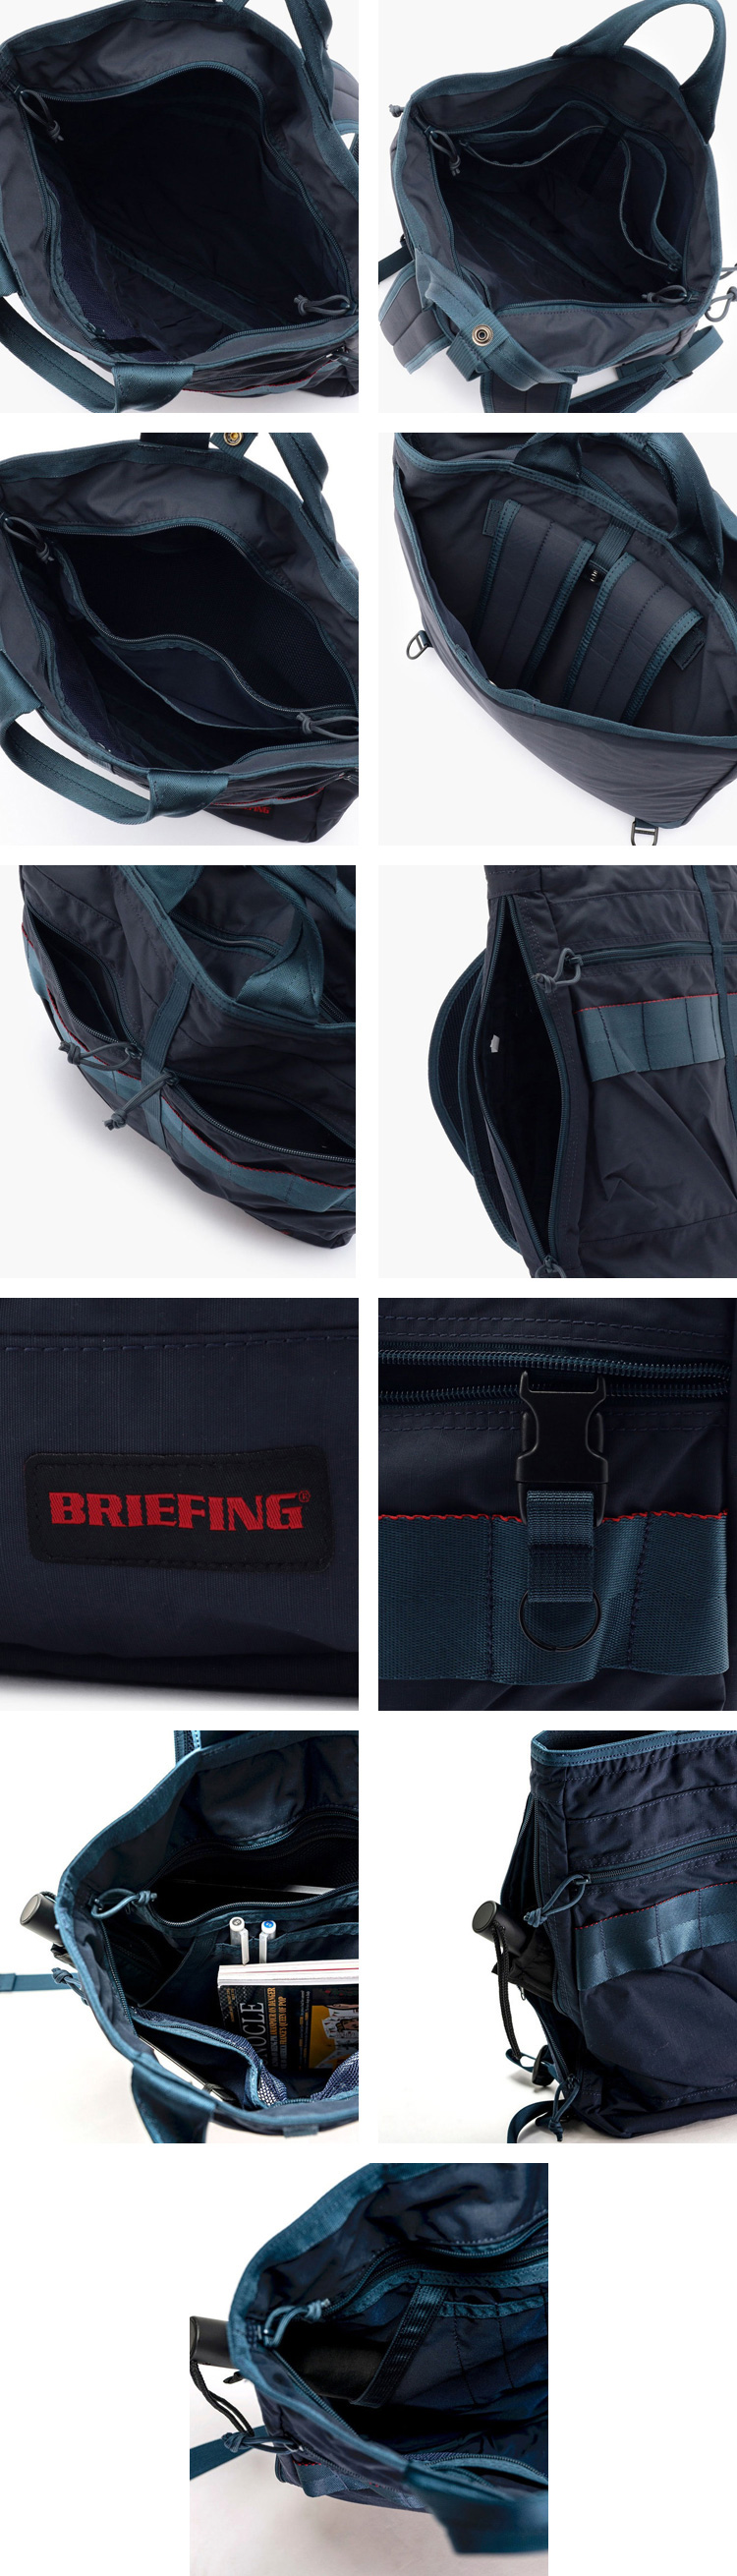 BRIEFING STEALTH PACK MW | Brownfloor clothing Official Onlineshop